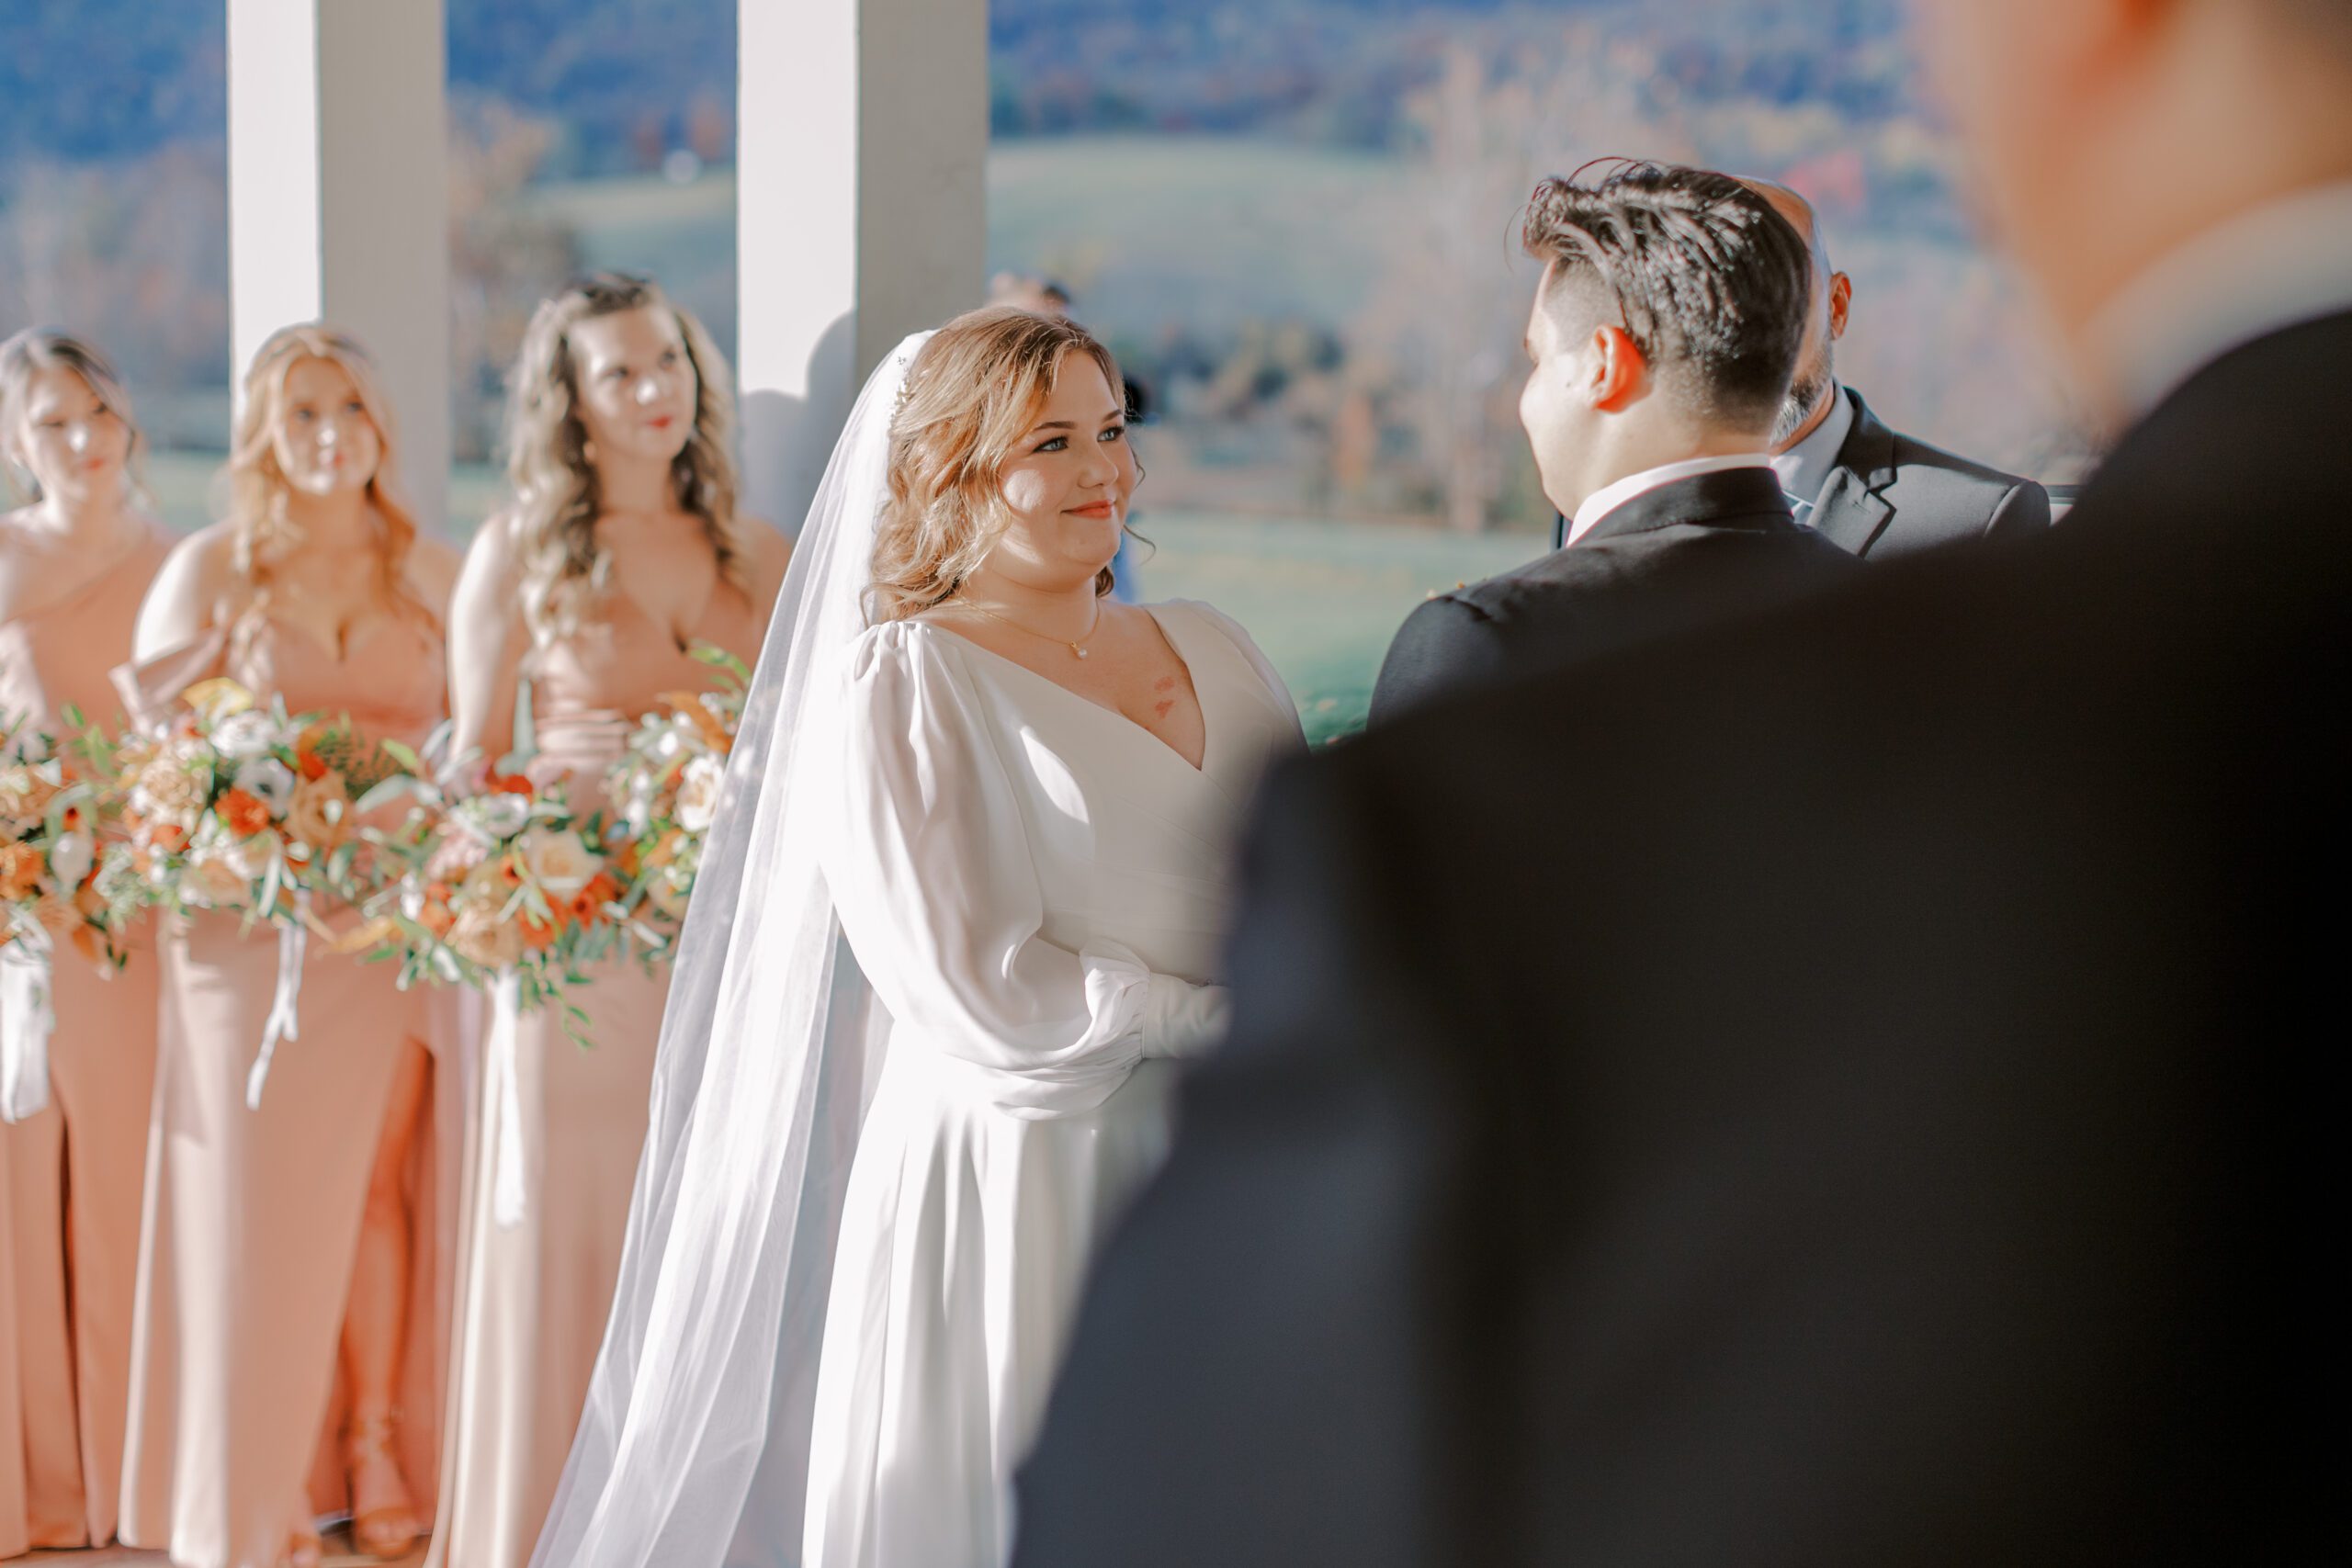 Image of bride smiling at groom, bridesmaids in background holding their flowers